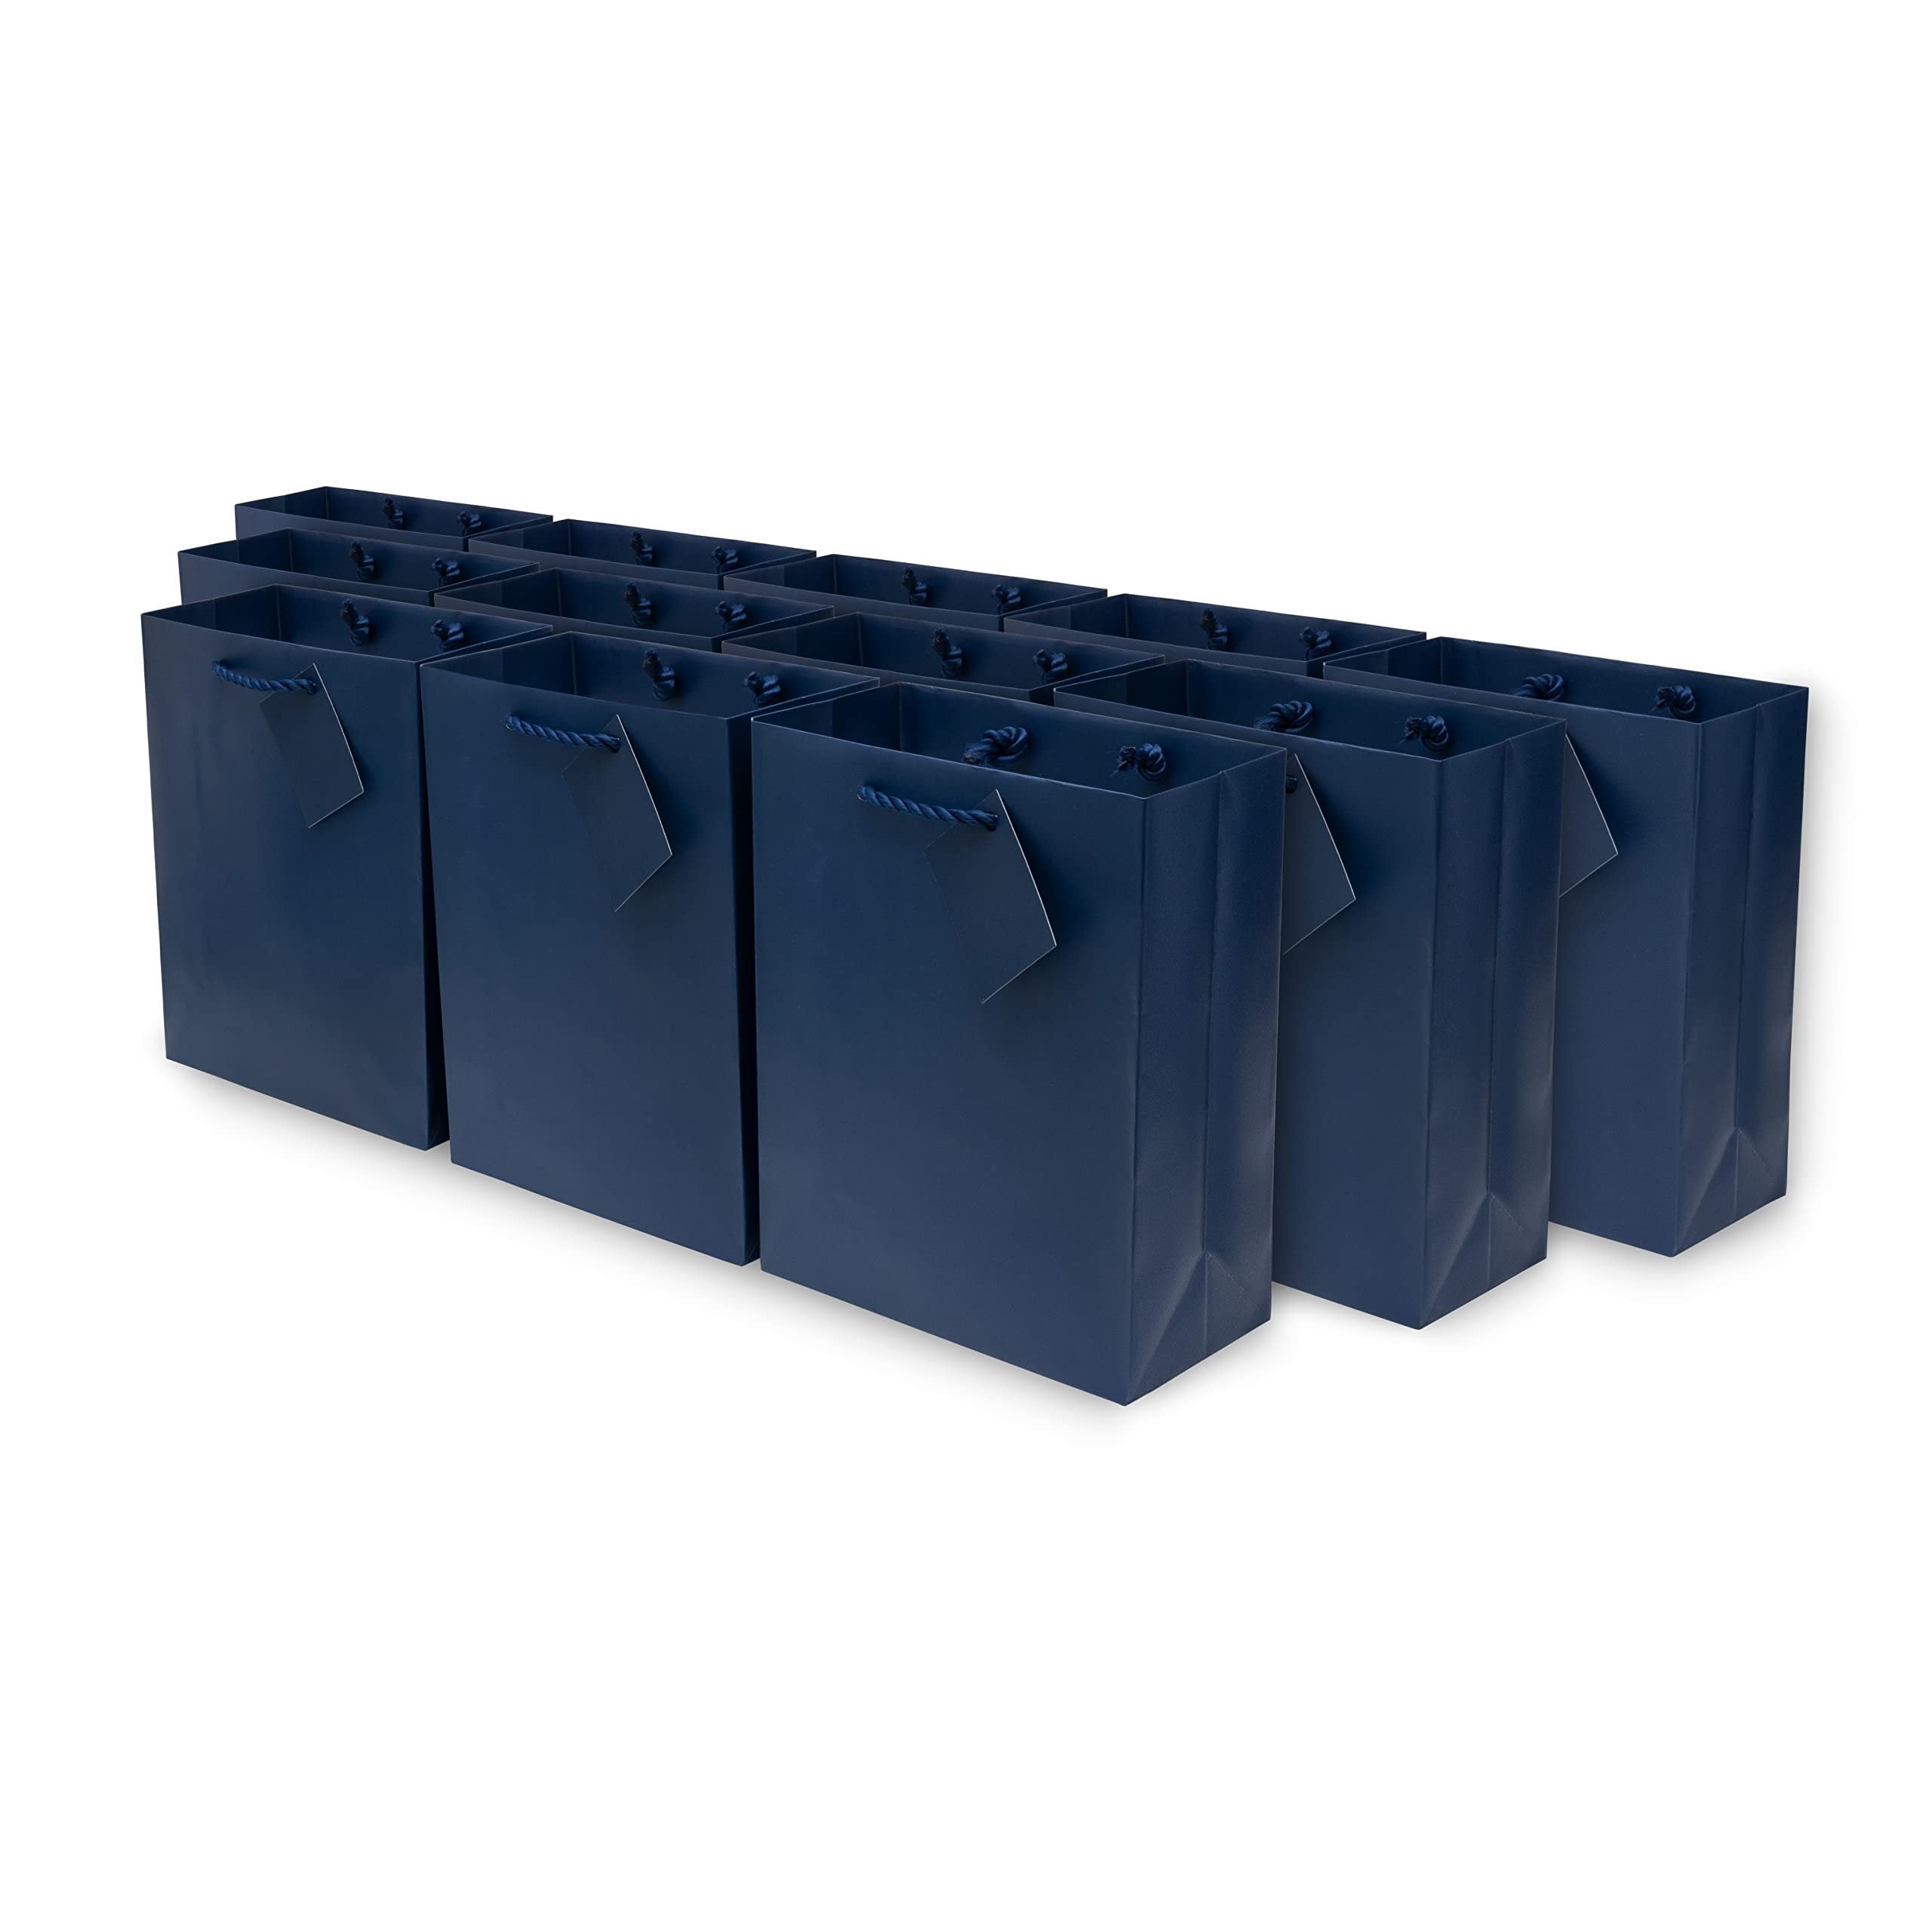 Blue Gift Bags - 12 Pack Small Navy Royal Blue Gift Bags with Handles, Paper Euro Totes for Christmas & Holiday Gift Wrap, Birthday Party Favor Bags for Boys & Men, Baby Showers, in Bulk - 6x3x7.5